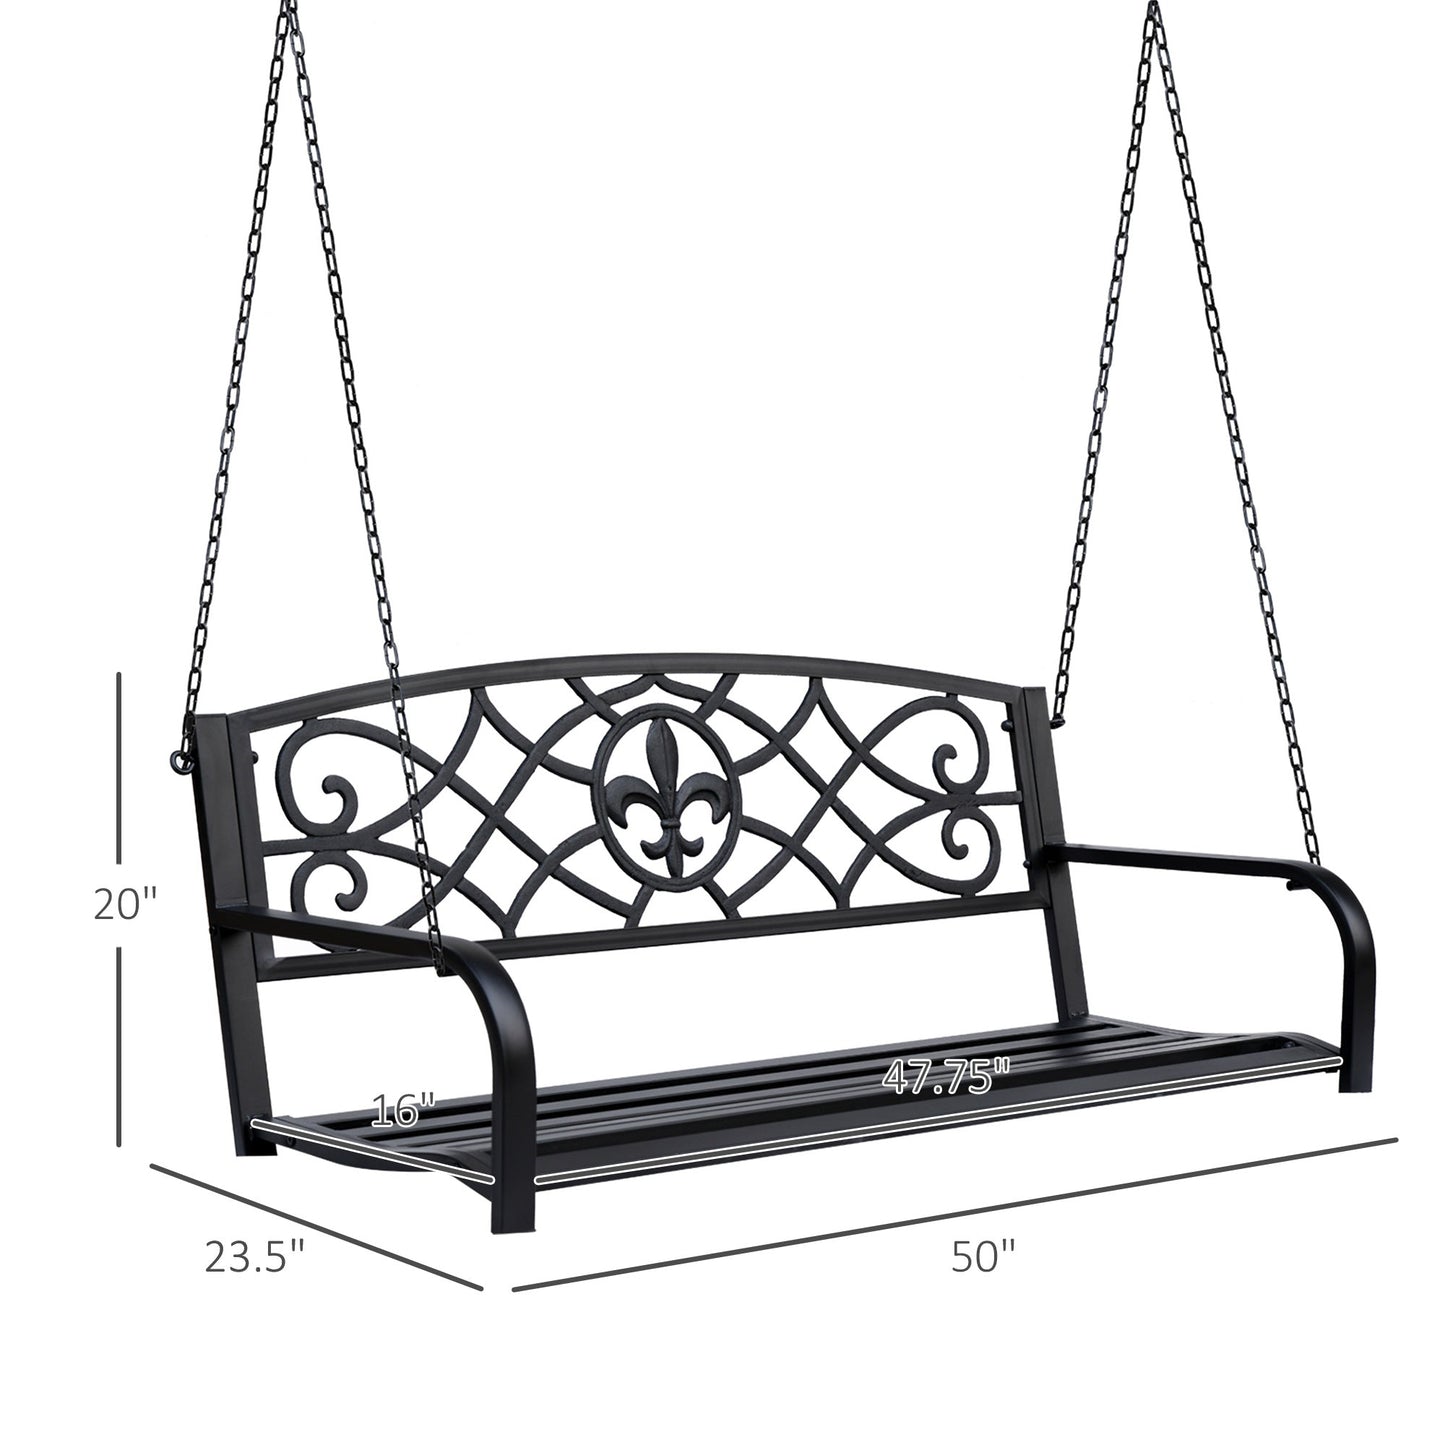 Outdoor and Garden-Steel Hanging Porch Swing, Fleur-de-Lis Design Outdoor Swing Seat Bench with Chains for Yard, Deck, 485 LBS Weight Capacity, Black - Outdoor Style Company